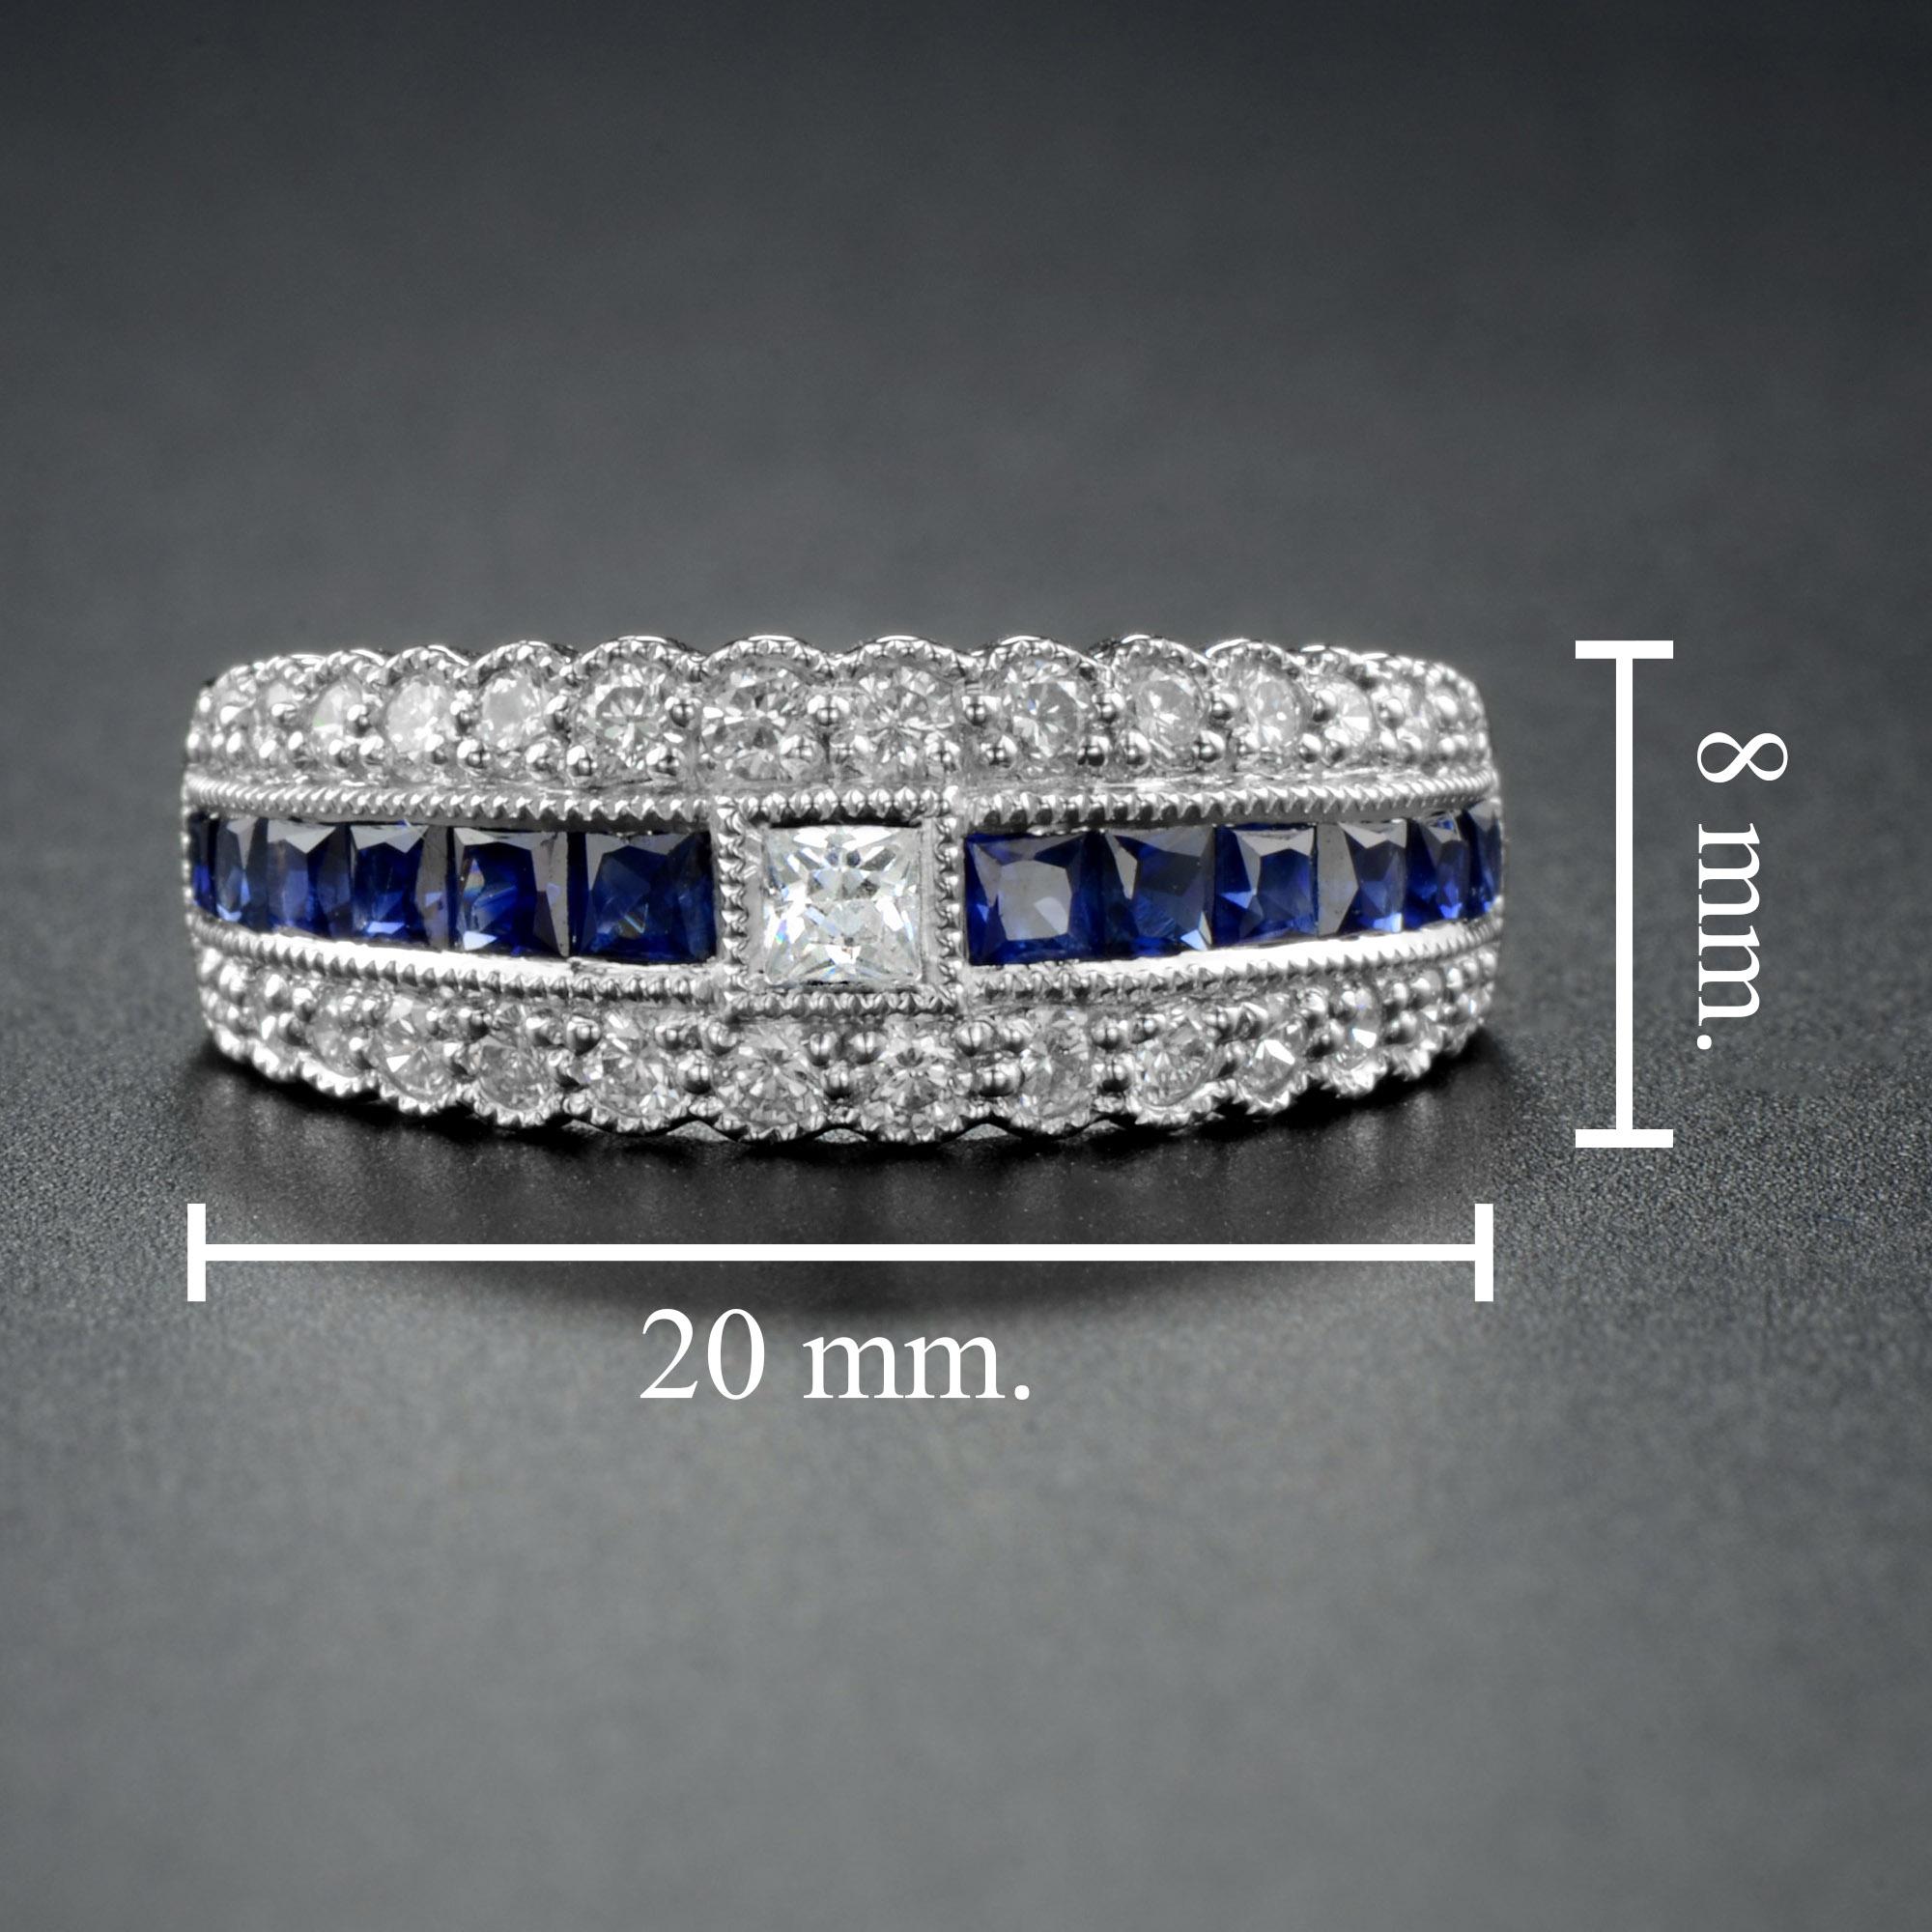 Women's Art Deco Style Diamond and Blue Sapphire Half Eternity Ring in 18K White Gold For Sale